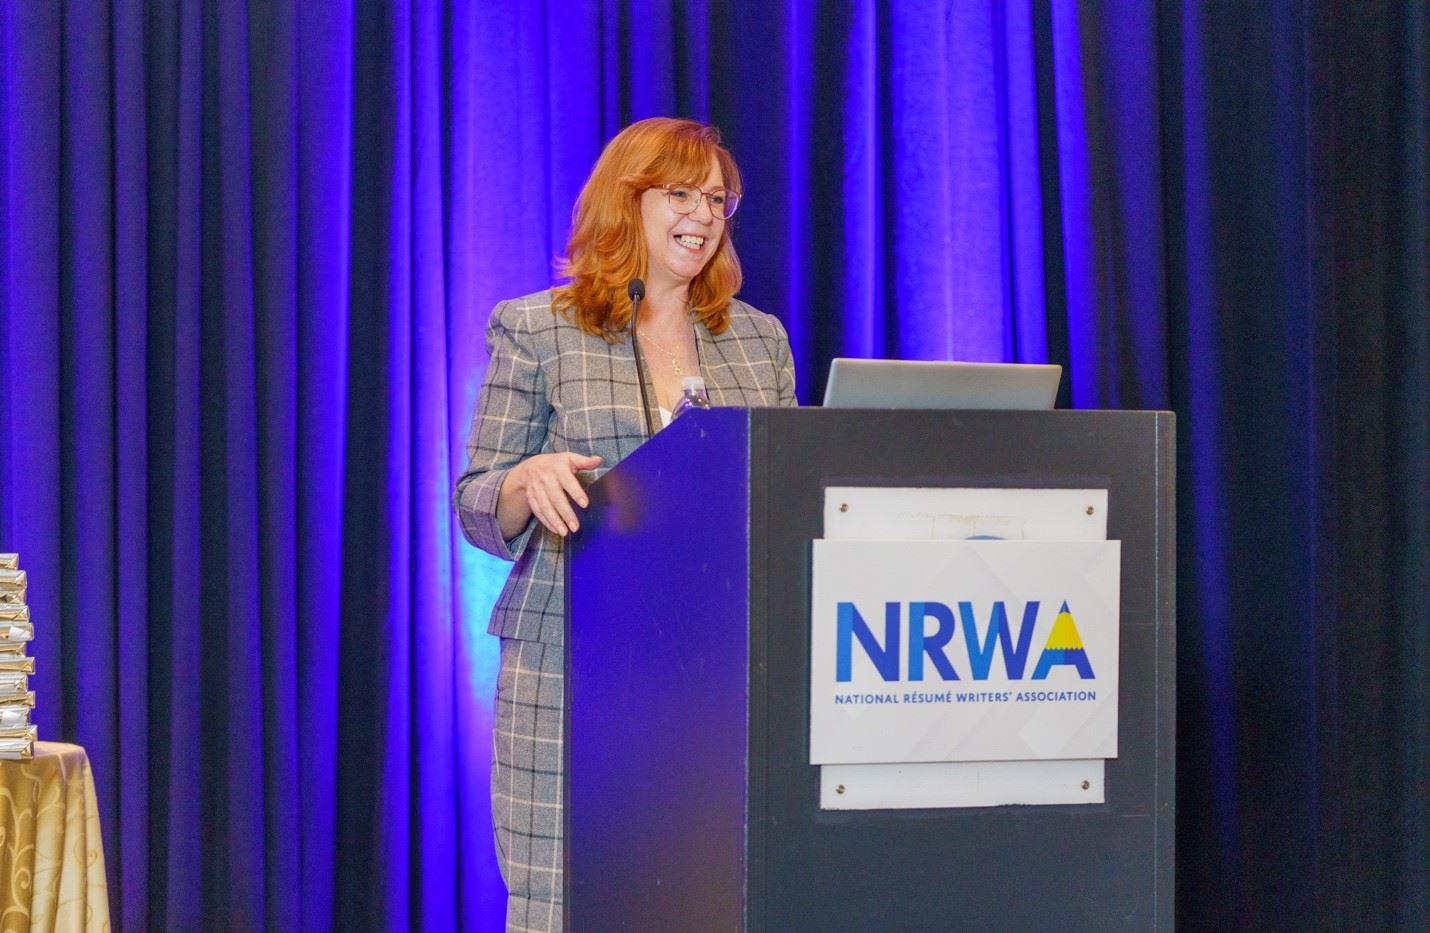 NRWA President Sara Timm presenting at the podium at the 2022 Conference in New Orleans